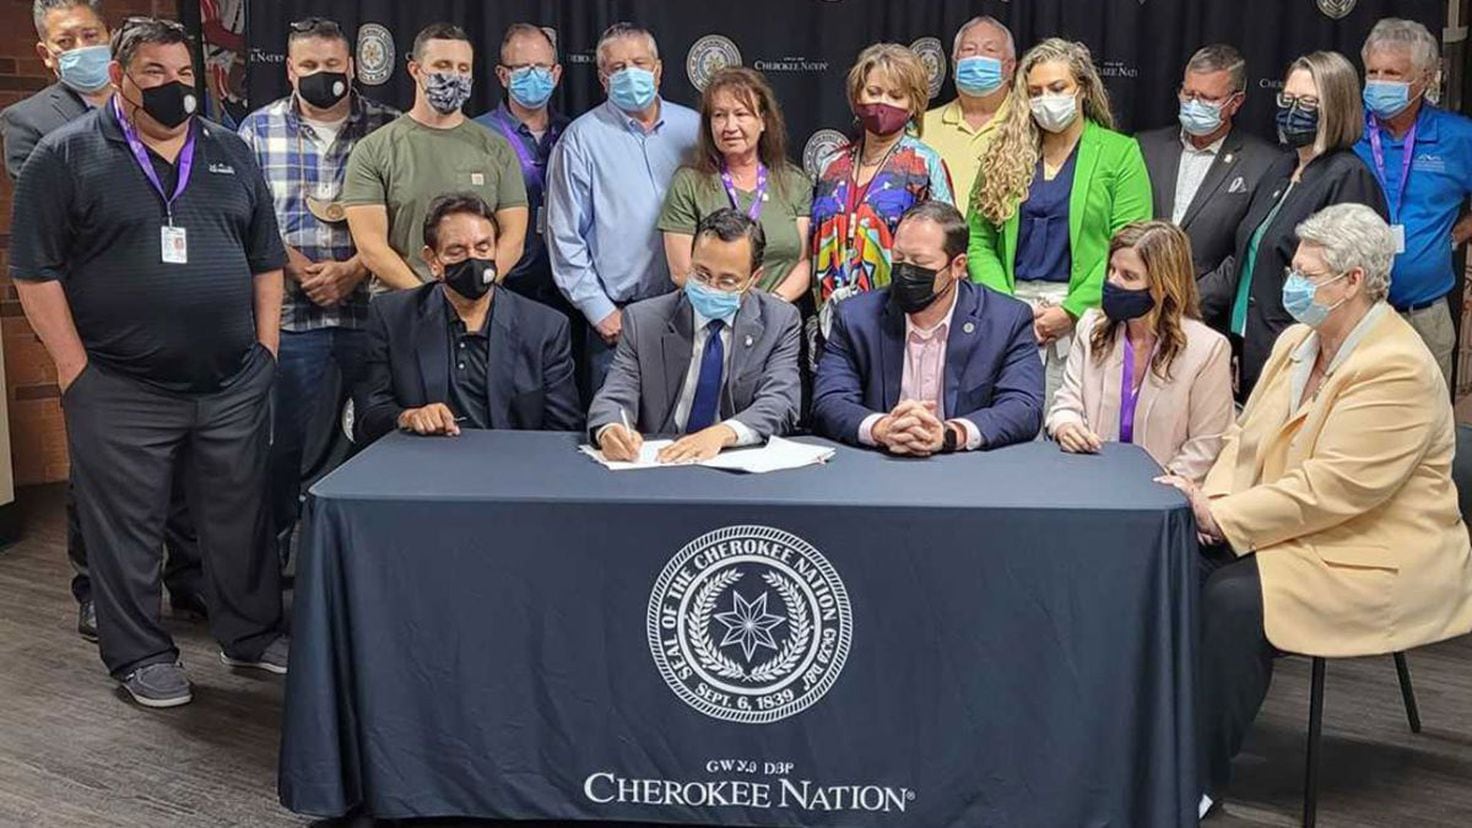 Cherokee Nation stimulus check who gets it and how much is it worth